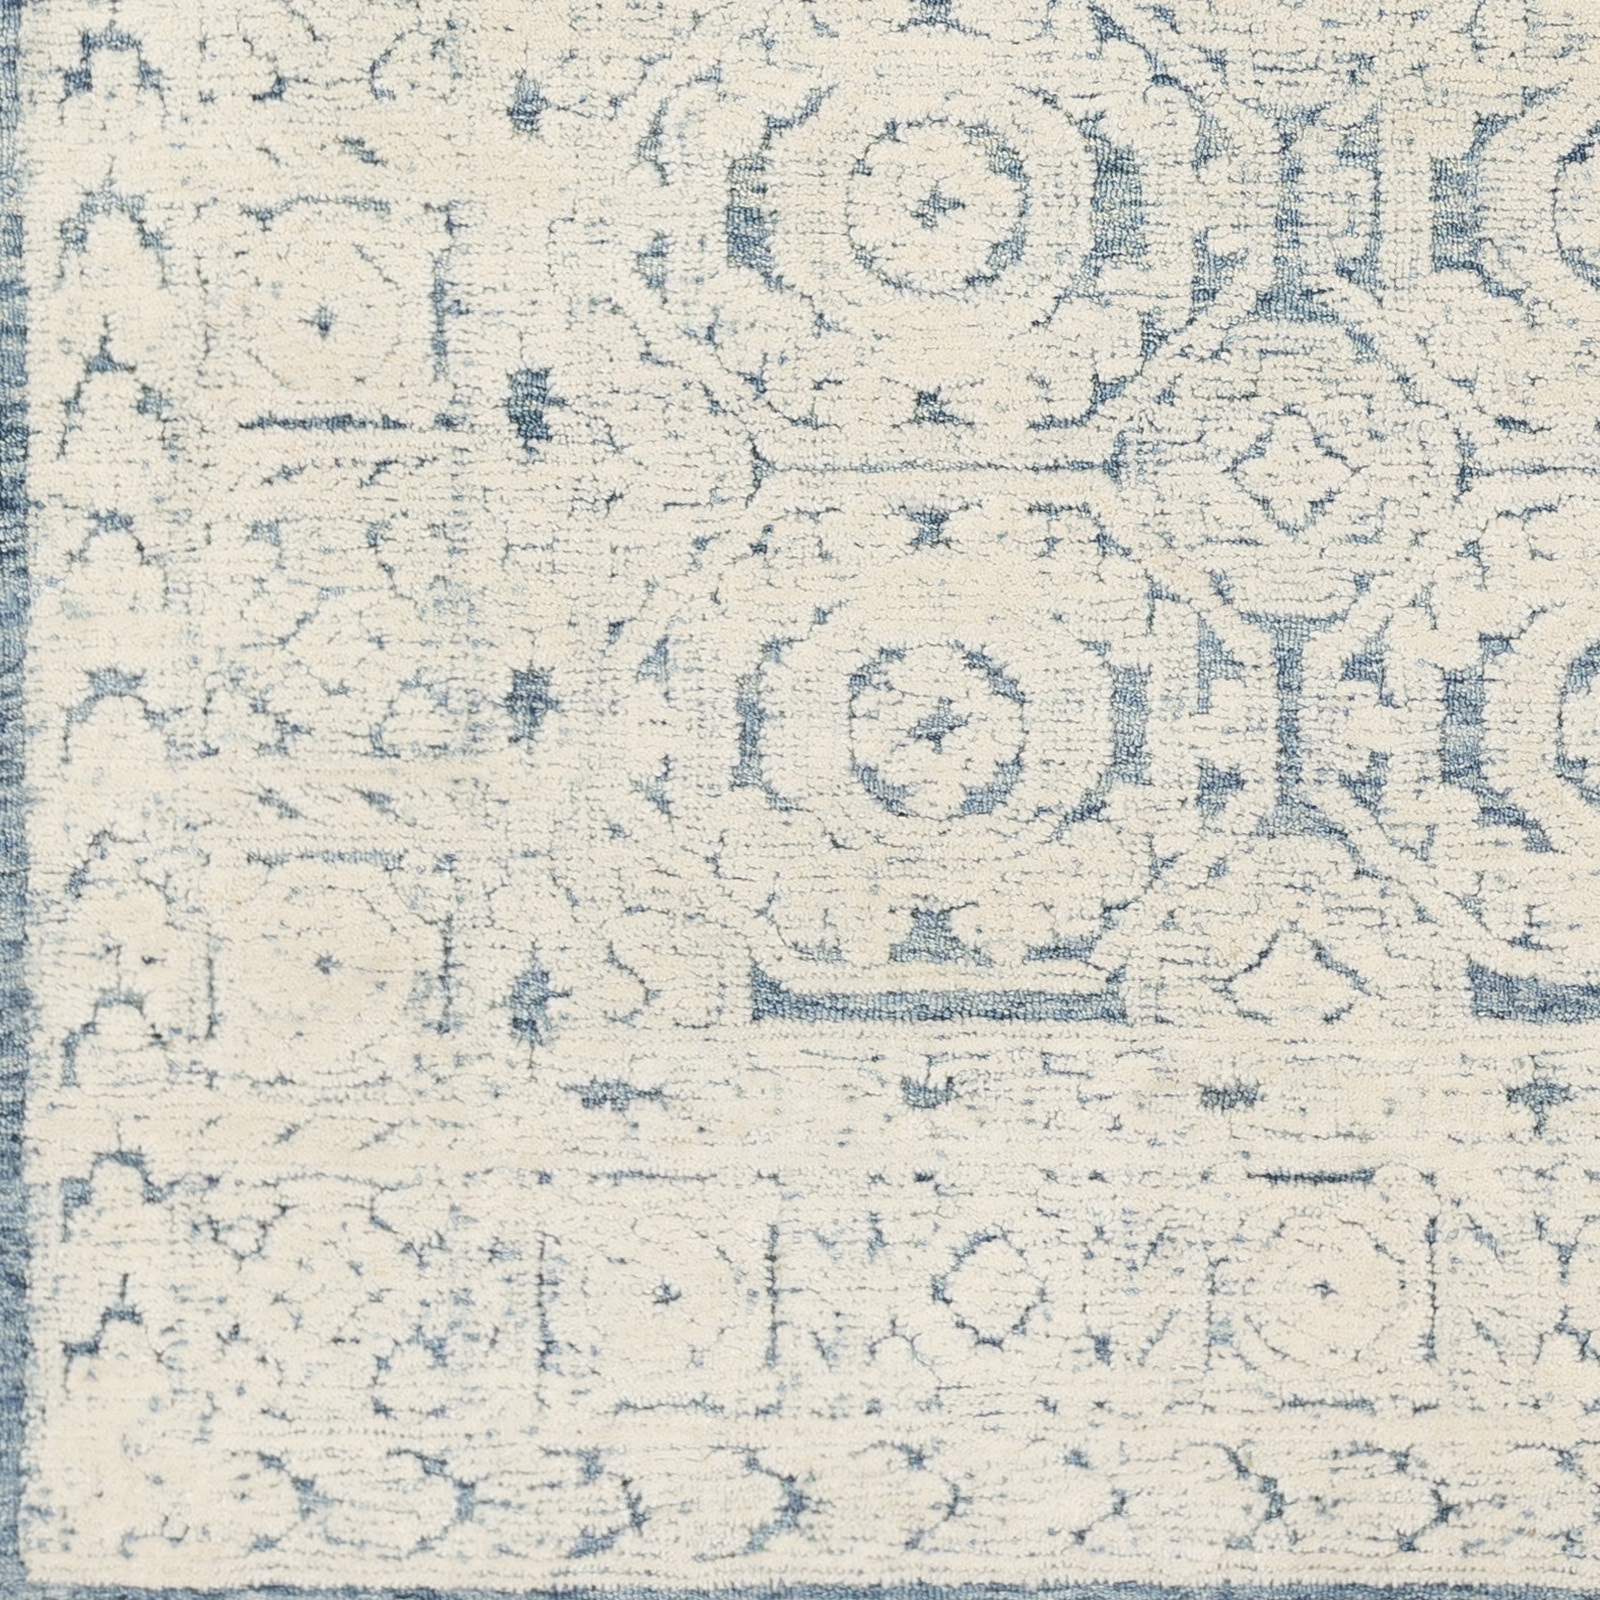 Louvre Rug, 2' x 3' - Image 2